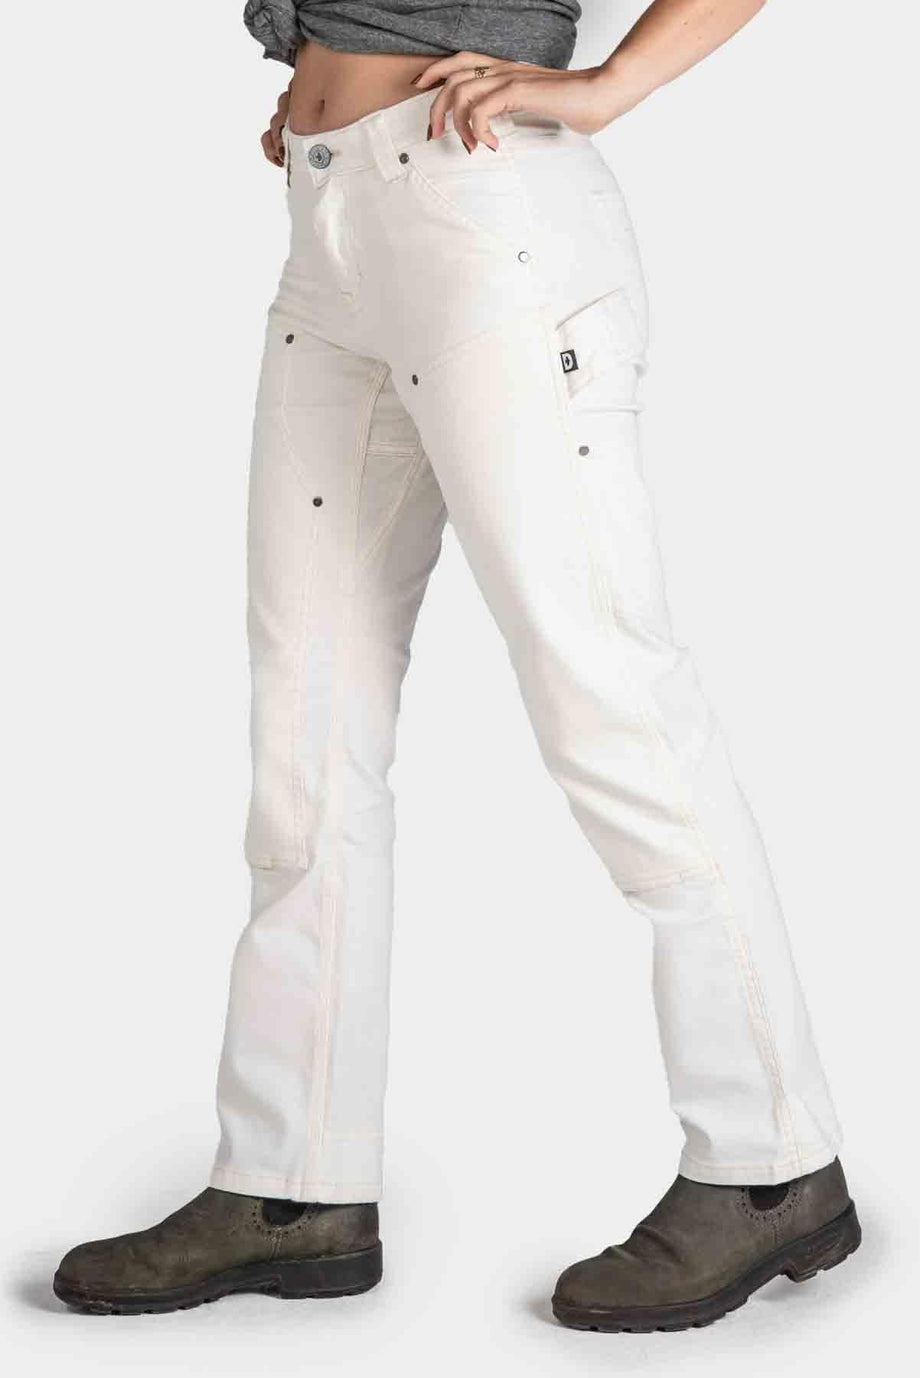 MASCOT ADVANCED 17031 White Trousers with Holster Pockets | MASCOT | Work  Trousers | Arco